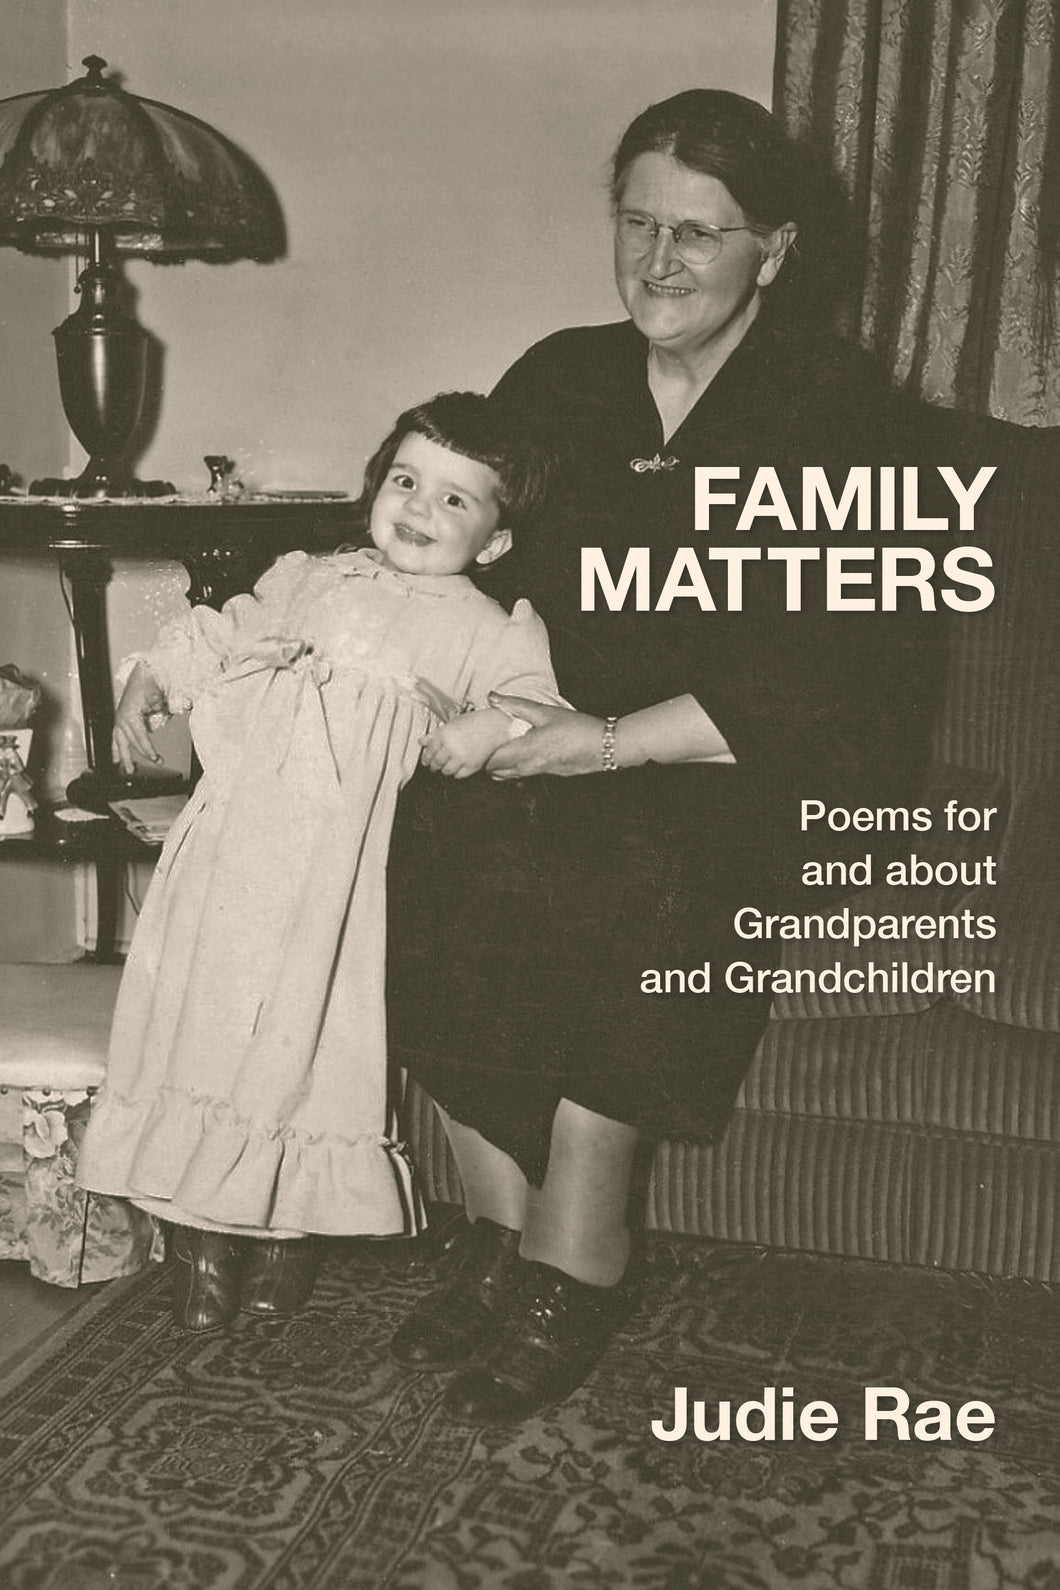 Family Matters ~ Poems for and about Grandparents and Grandchildren